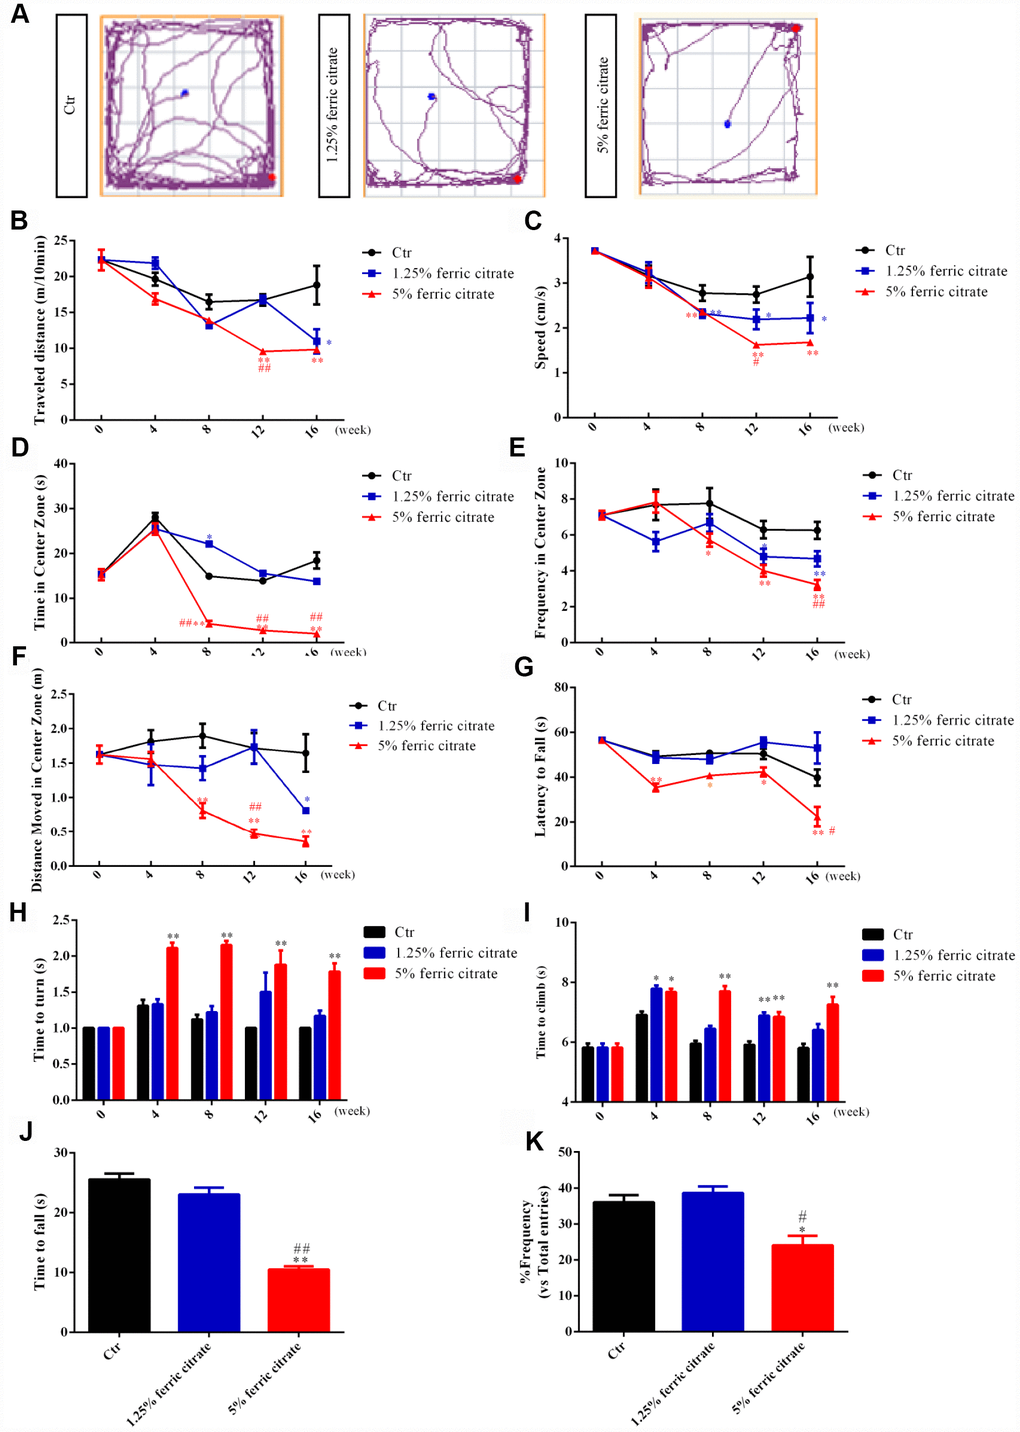 Motor and cognitive defects are associated with iron accumulation in ferric citrate-supplemented mice. (A) Representative maps of mouse activities in the open field test. (B) Effect of ferric citrate on the distance traveled by mice. (C) Effect of ferric citrate on the speed of mice. (D) Effect of ferric citrate on the time mice spent in the center zone. (E) Effect of ferric citrate on the frequency mice moved into the center zone. (F) Effect of ferric citrate on the distance mice traveled in the center zone. (G) Effect of ferric citrate on the fall latency of mice. (H and I) Effect of ferric citrate on the performance of mice in the pole test. (J) Effect of ferric citrate on the time to fall of mice in the traction test. (K) Effect of ferric citrate on the cognitive functions of mice, as evidenced by the quantification of their frequency to enter the novel arm in the Y-maze test. Error bars indicate SD. Compared with the Ctr group, *p#p##p